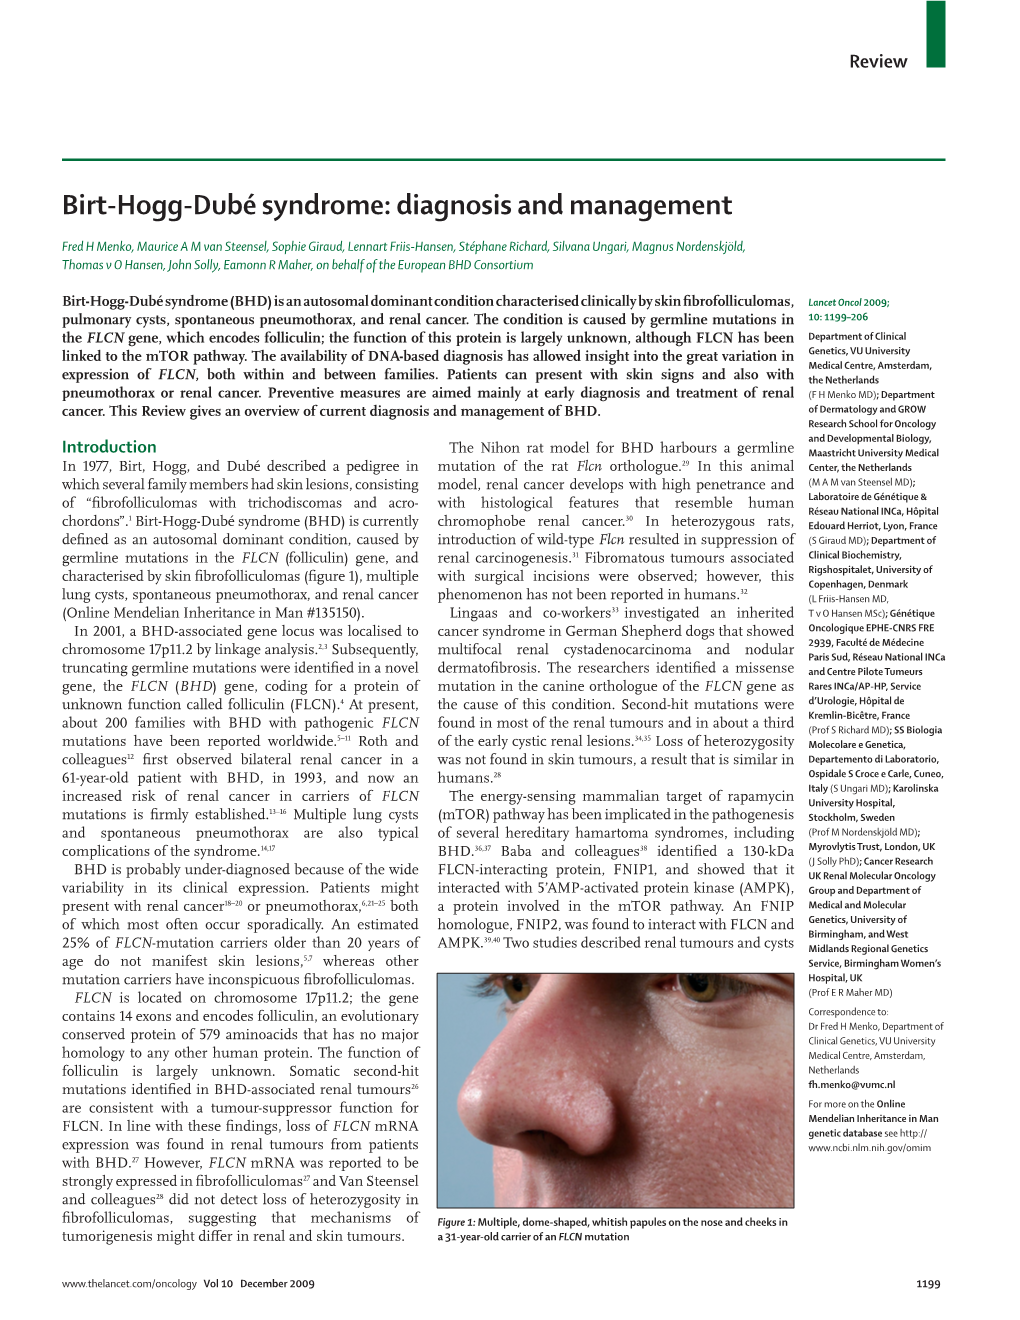 Diagnosis and Management